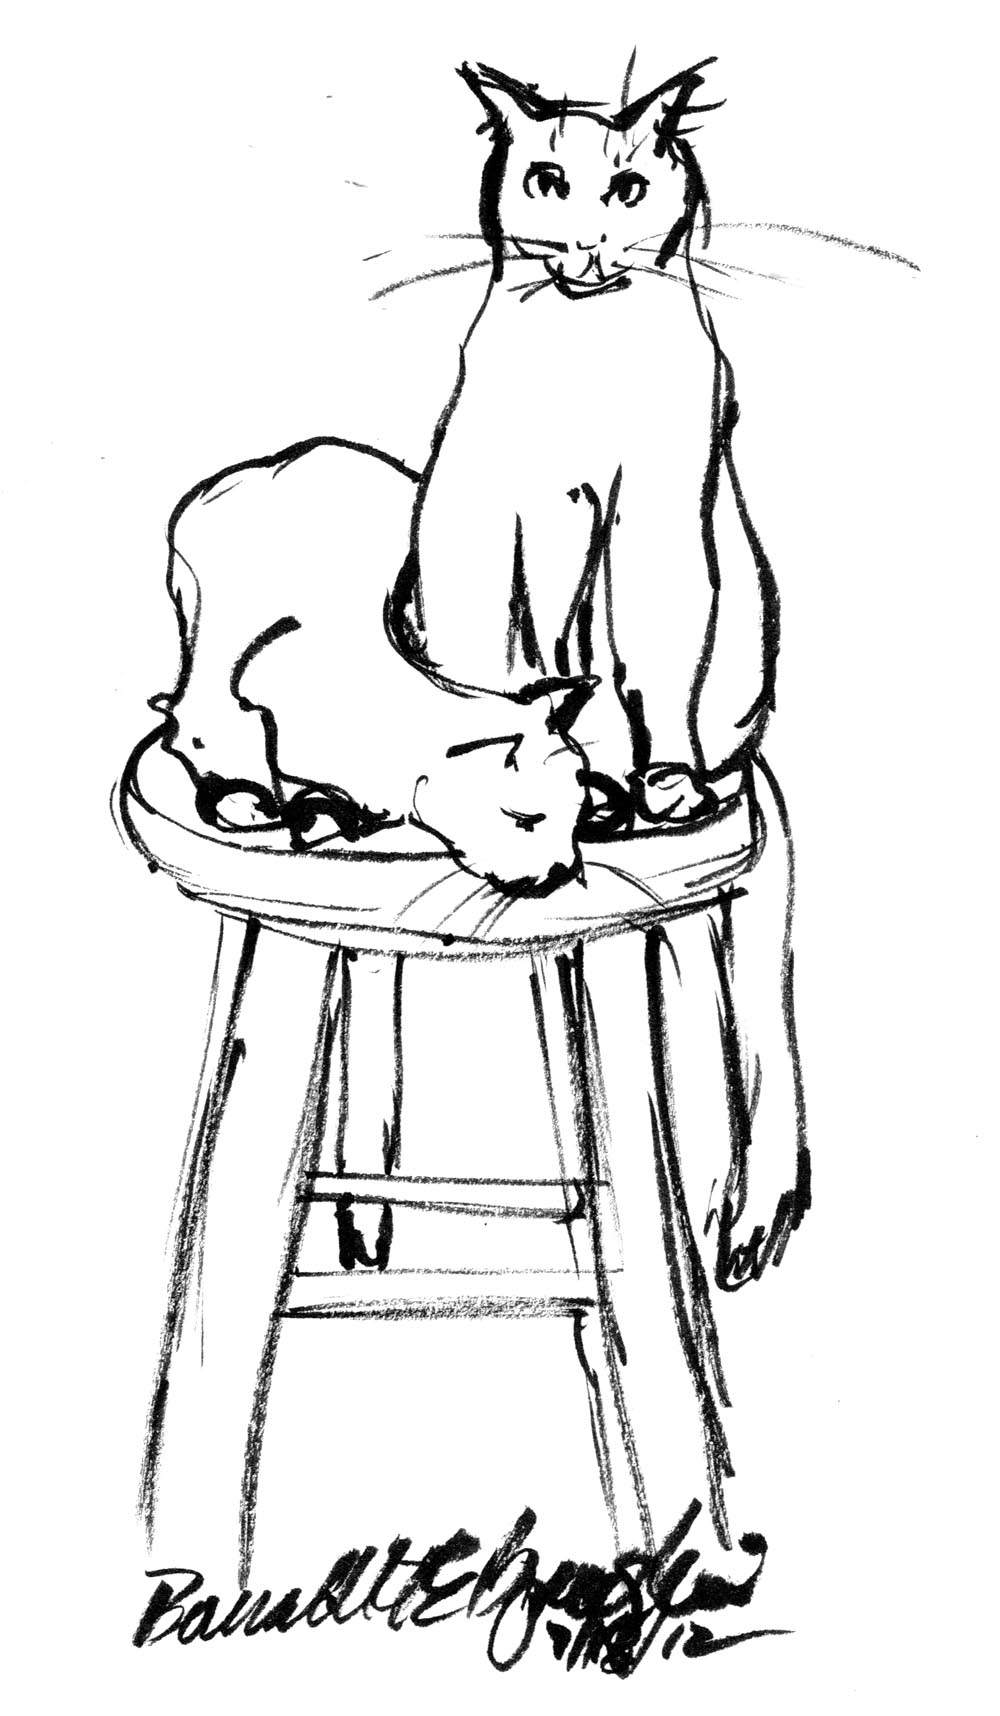 ink sketch of cats on stool